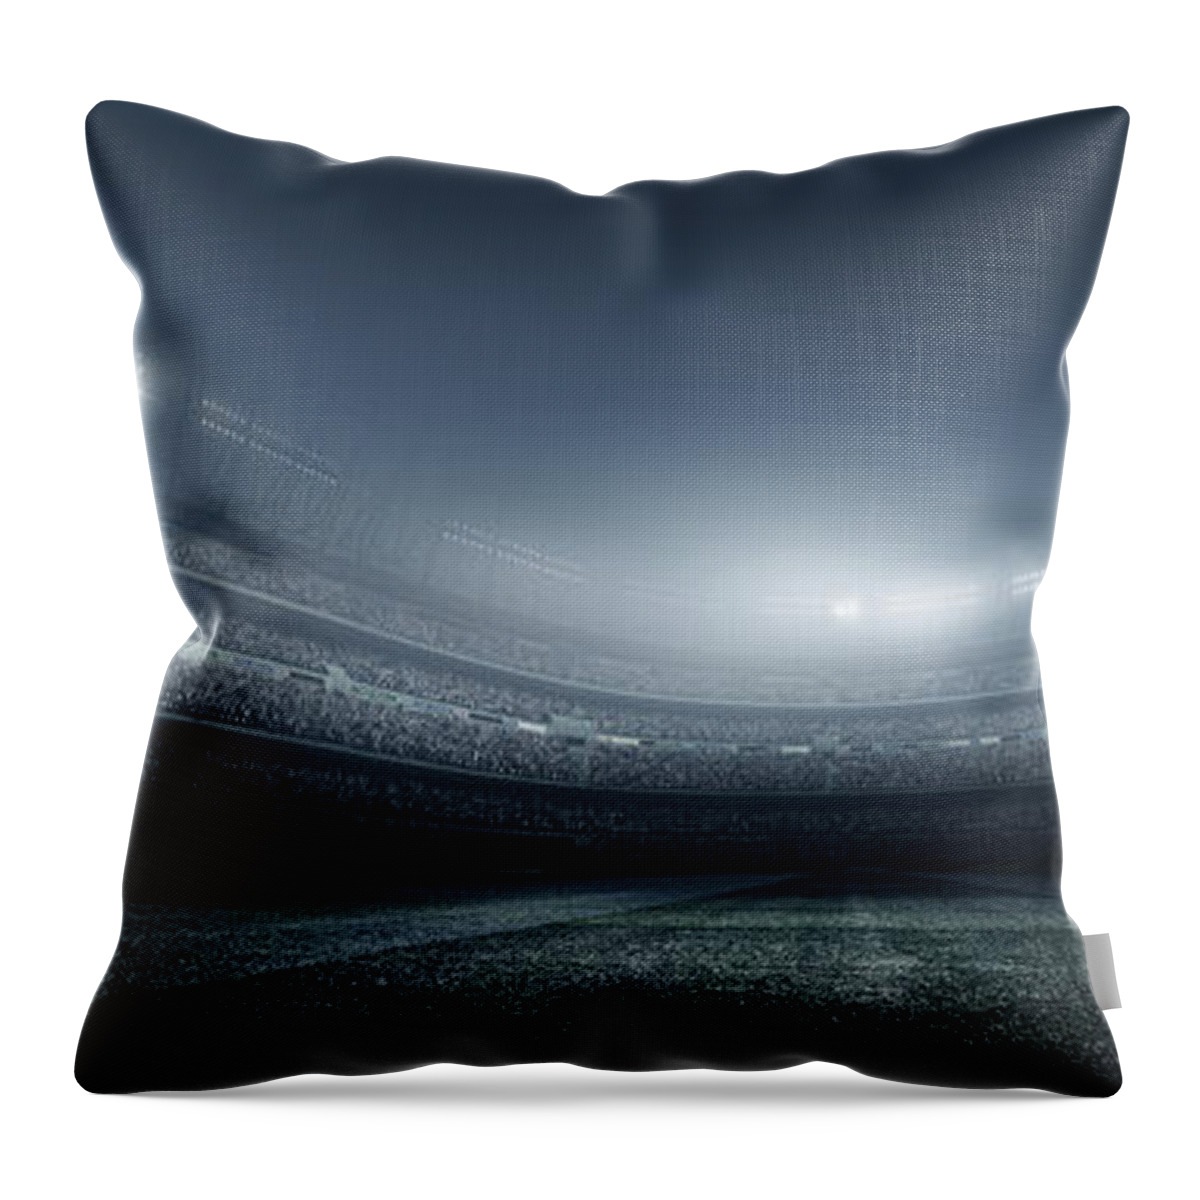 Soccer Uniform Throw Pillow featuring the photograph Soccer Player With Ball In Stadium by Dmytro Aksonov